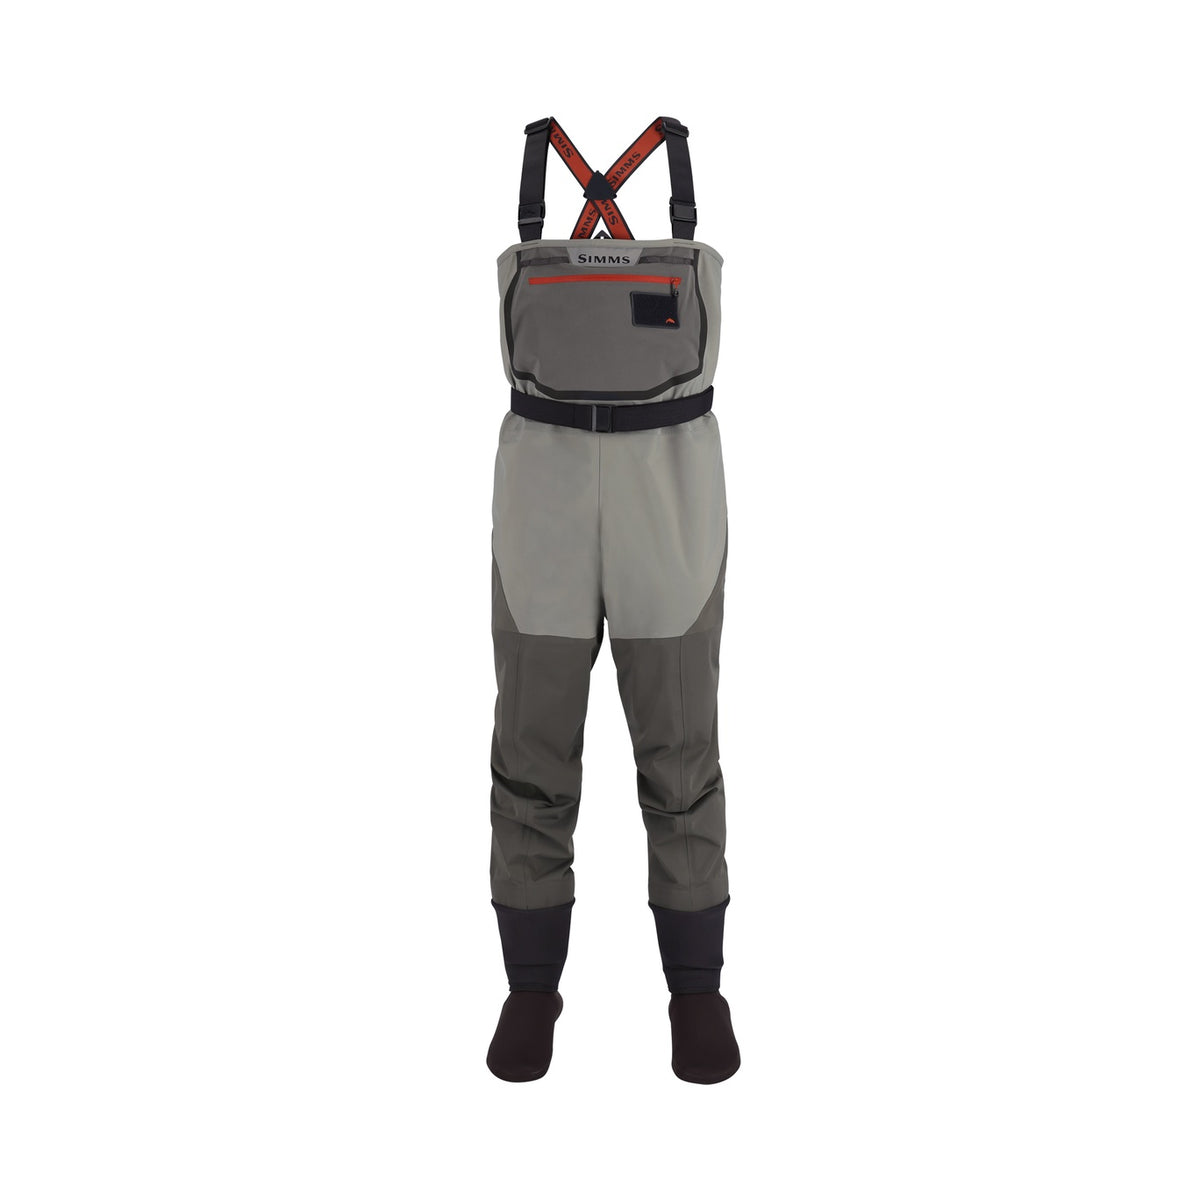 Fishing Waders for Men for sale in St. John's, Newfoundland and